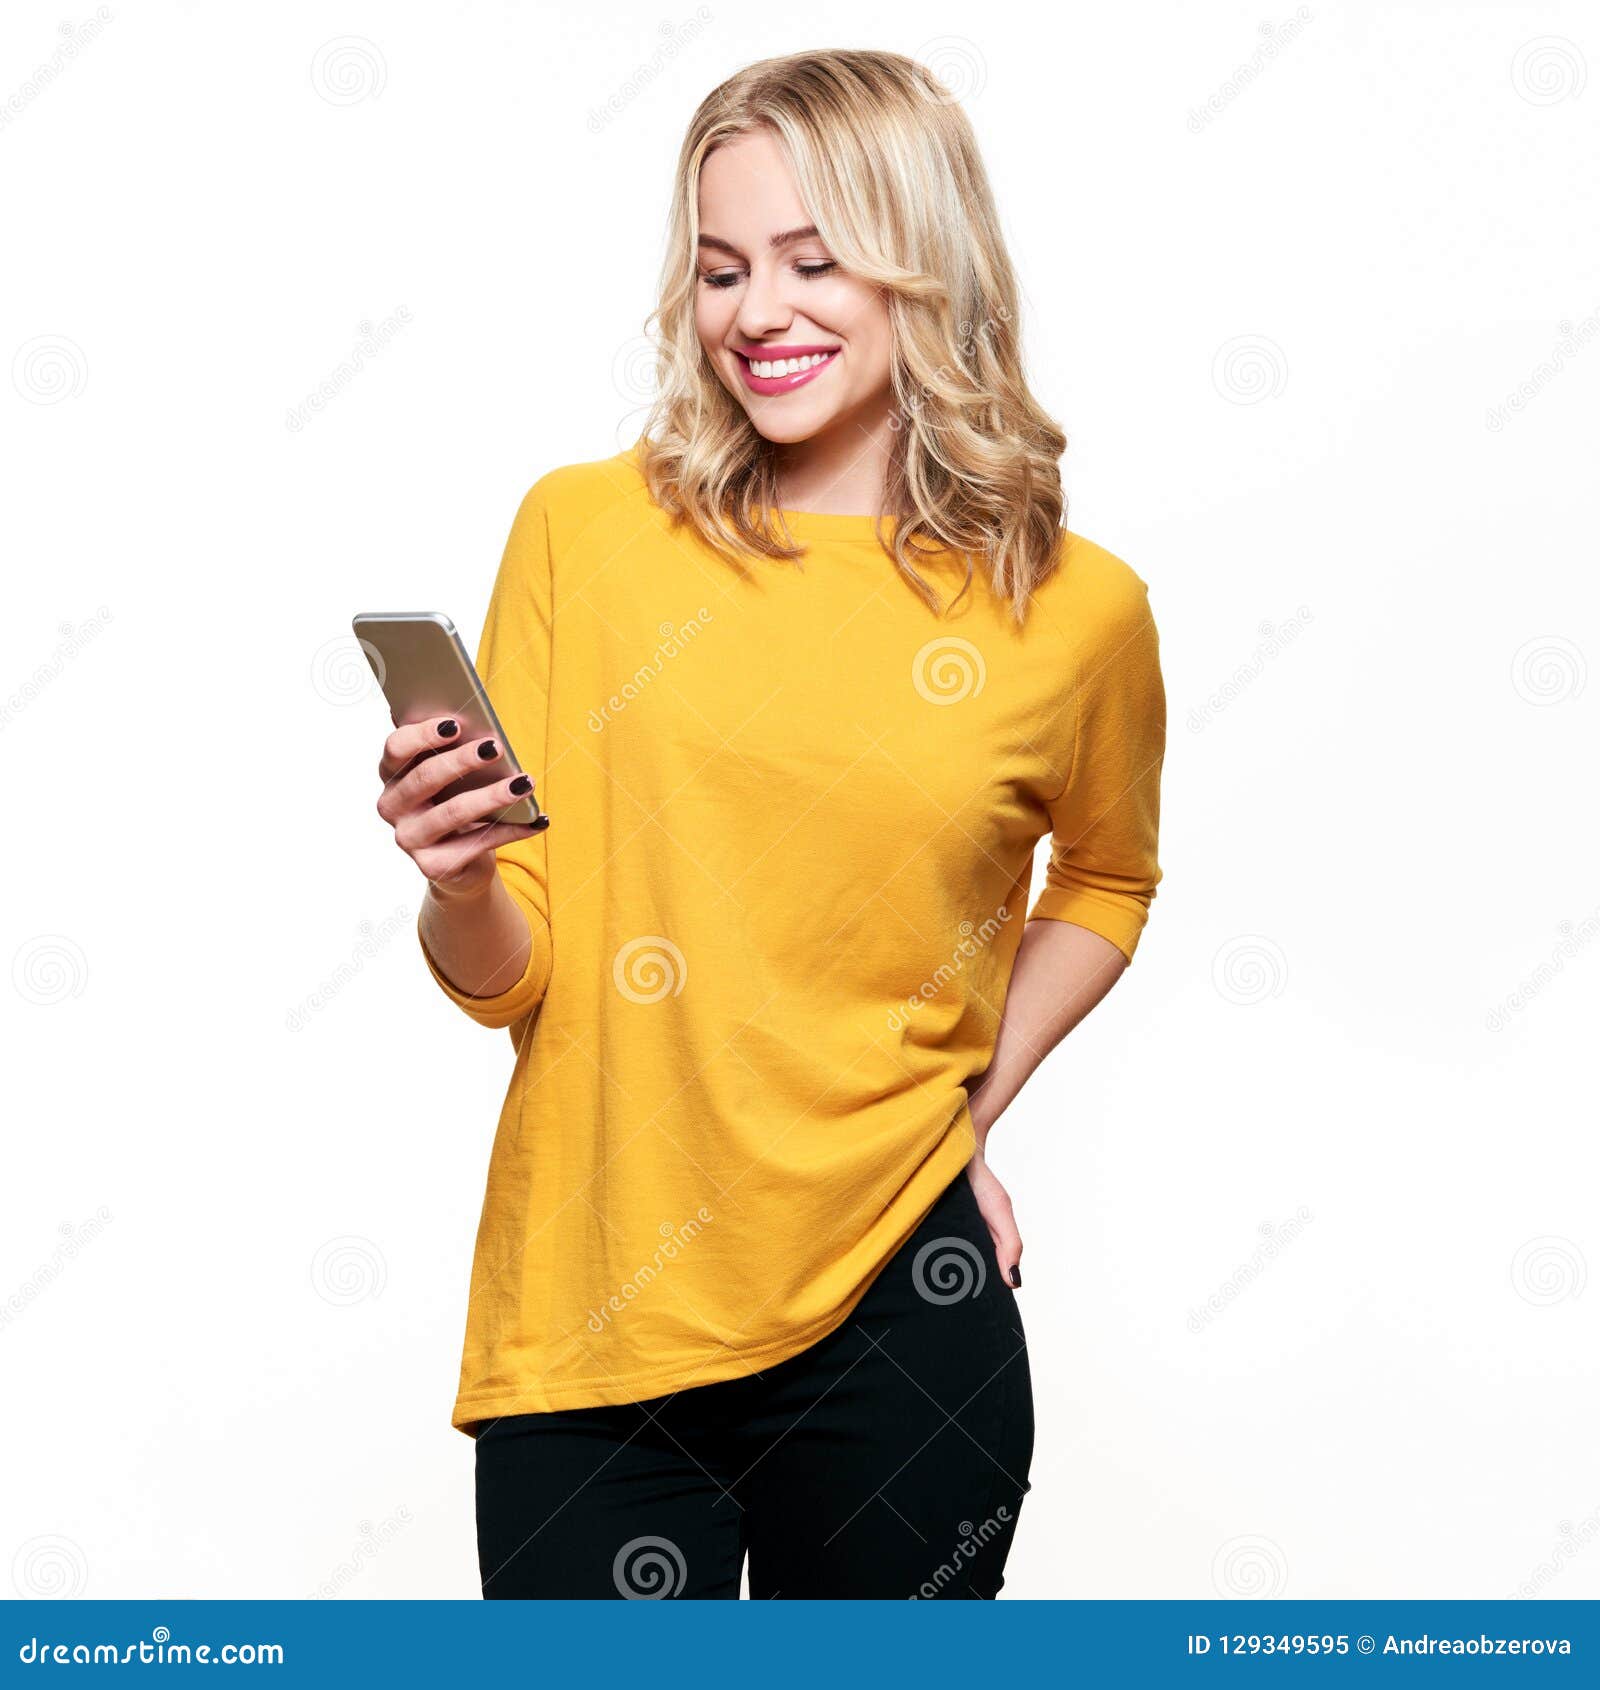 gorgeous smiling woman looking at her mobile phone. woman texting on her phone,  over white.